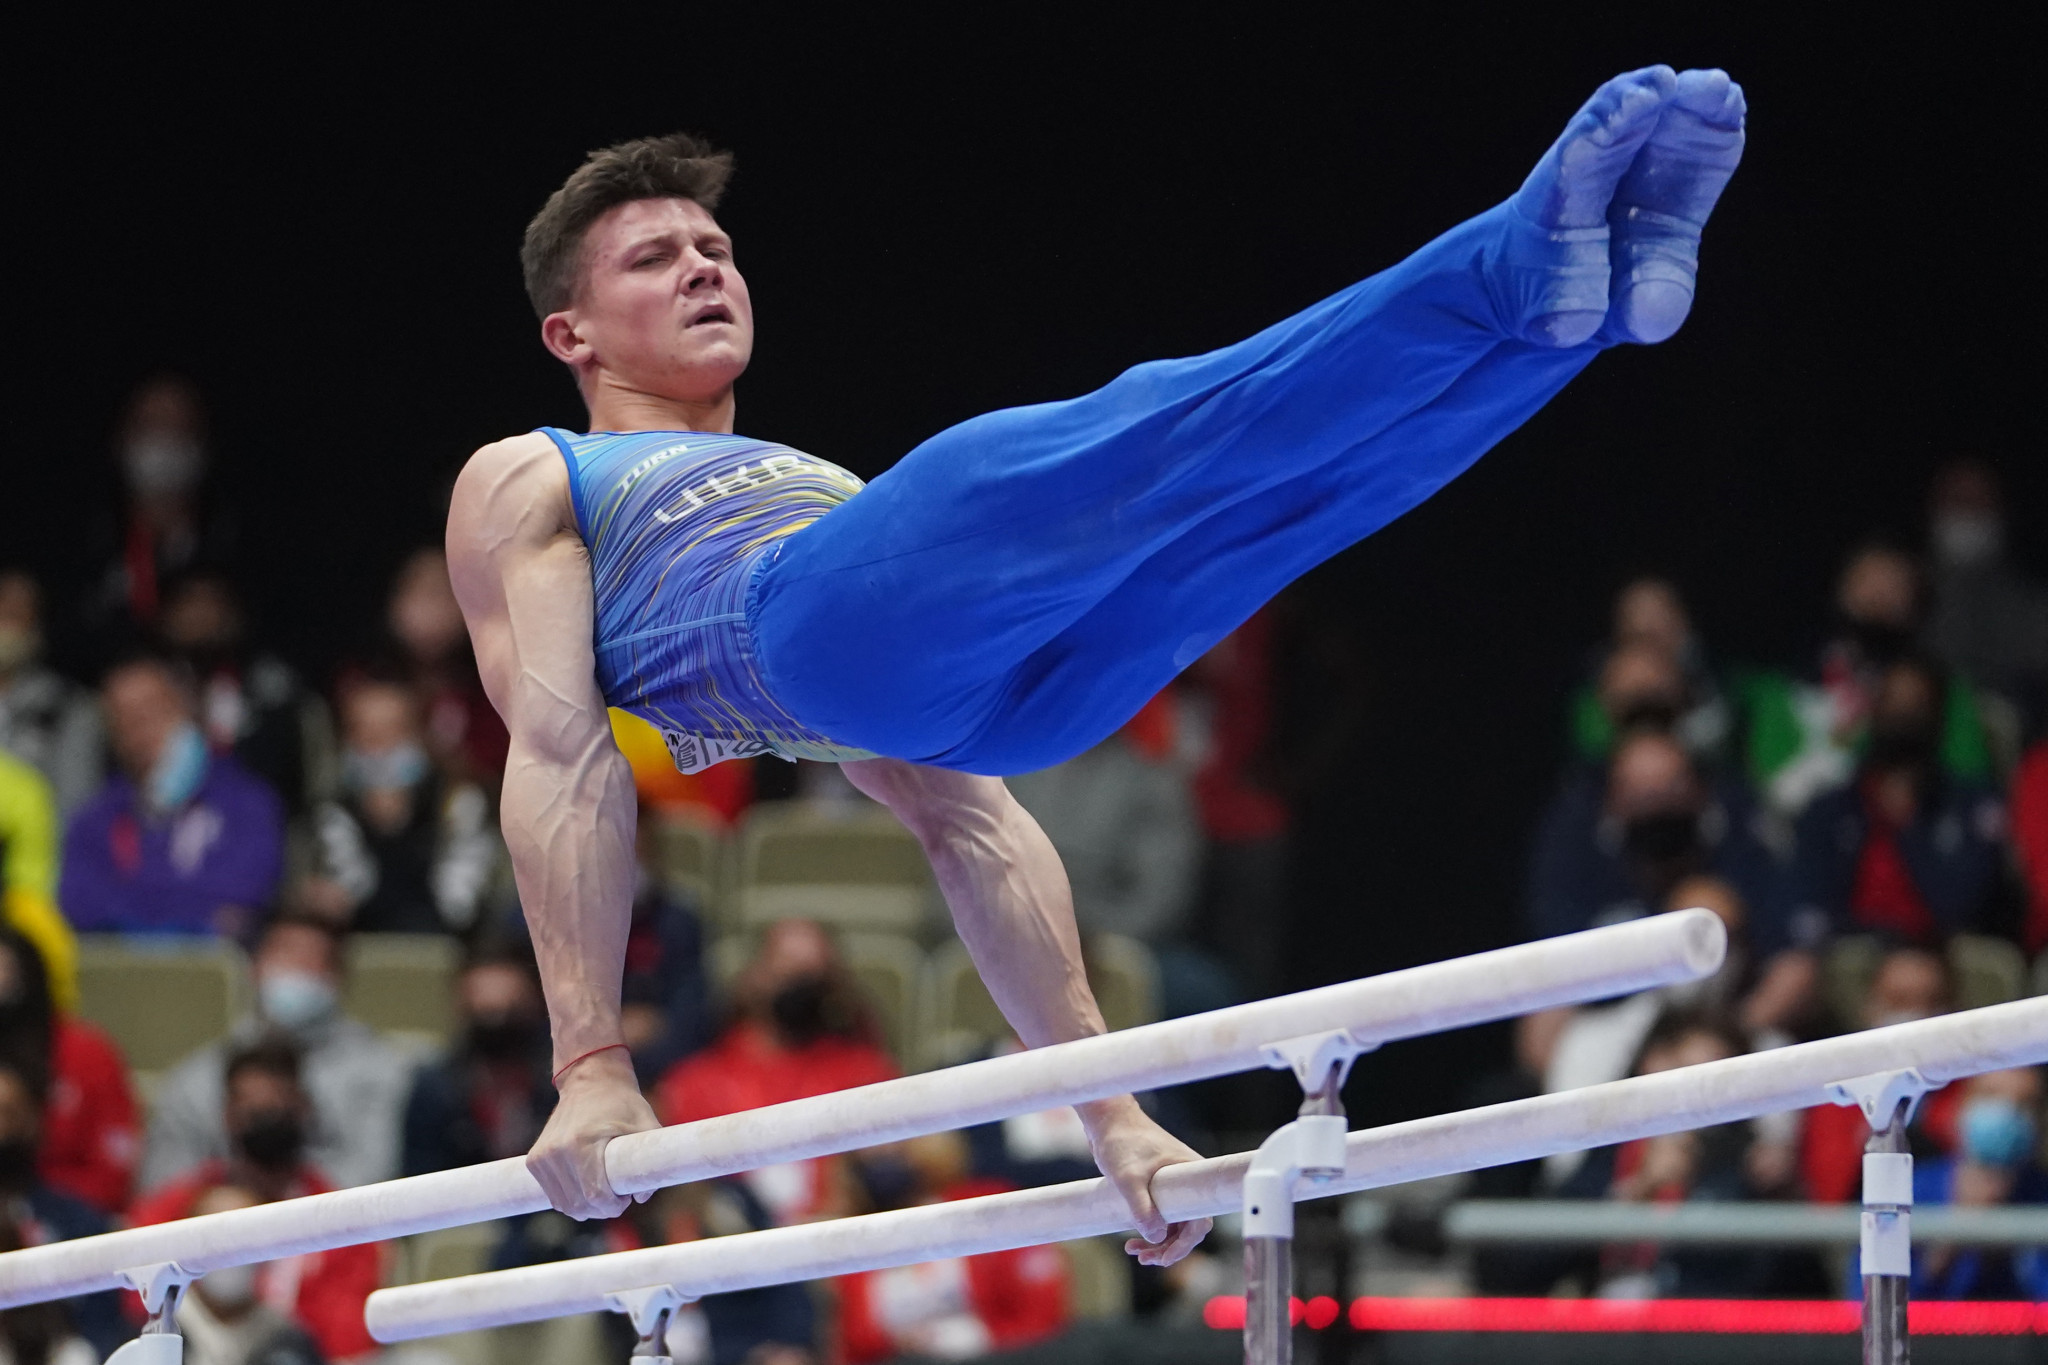 Ukraine's Illia Kovtun performed strongly again despite his nation facing war ©Getty Images